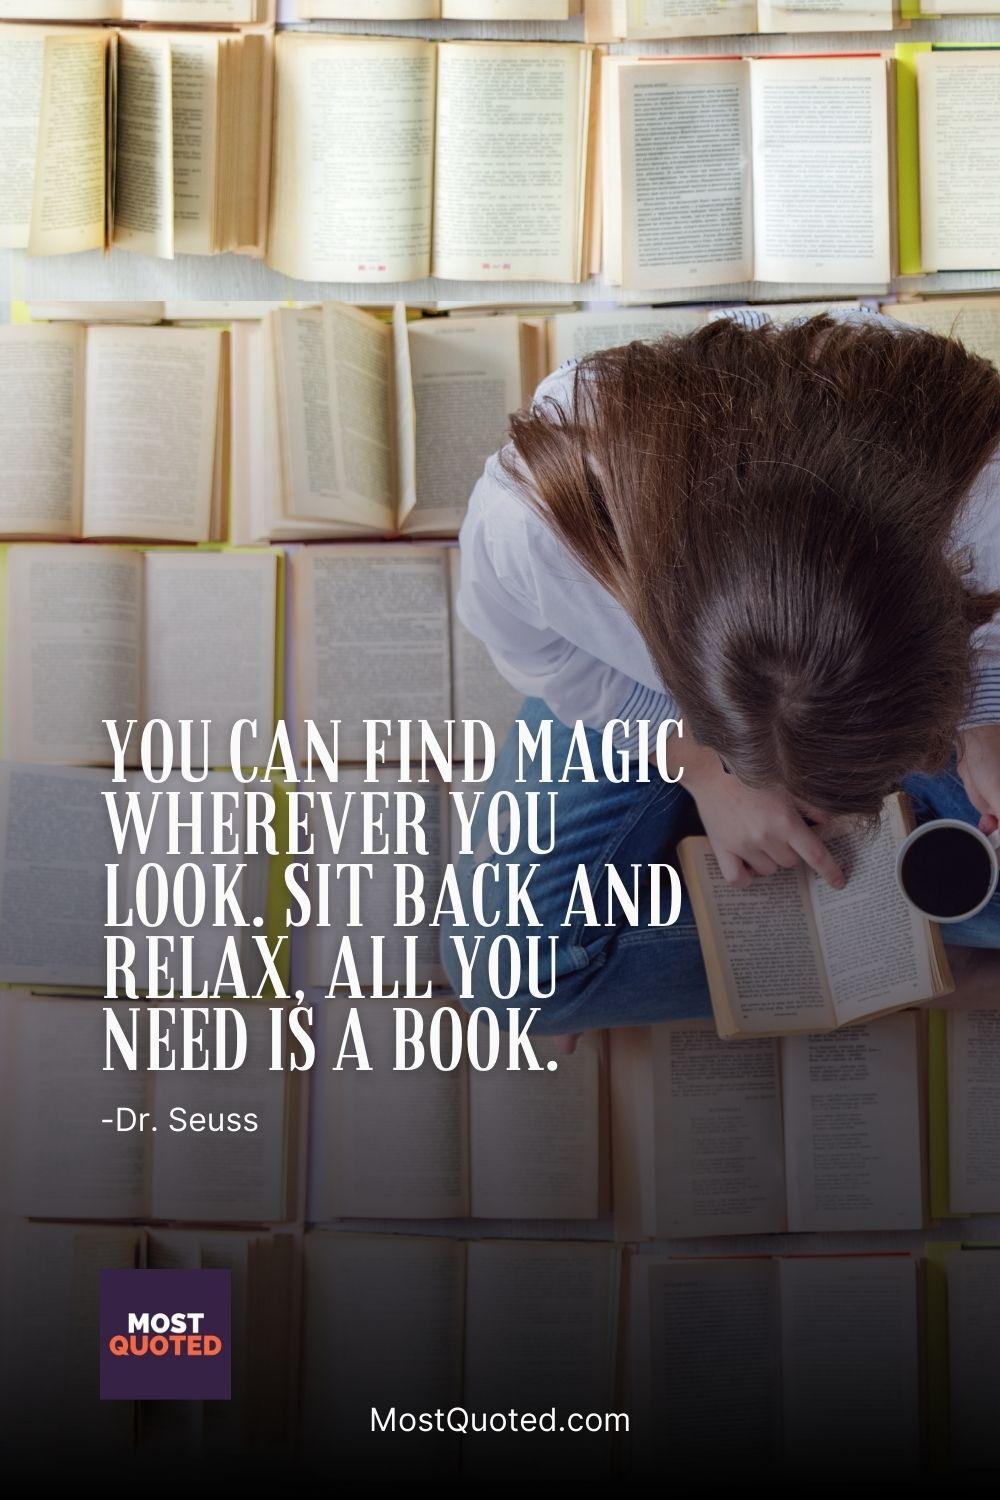 You can find magic wherever you look. Sit back and relax, all you need is a book. - Dr. Seuss